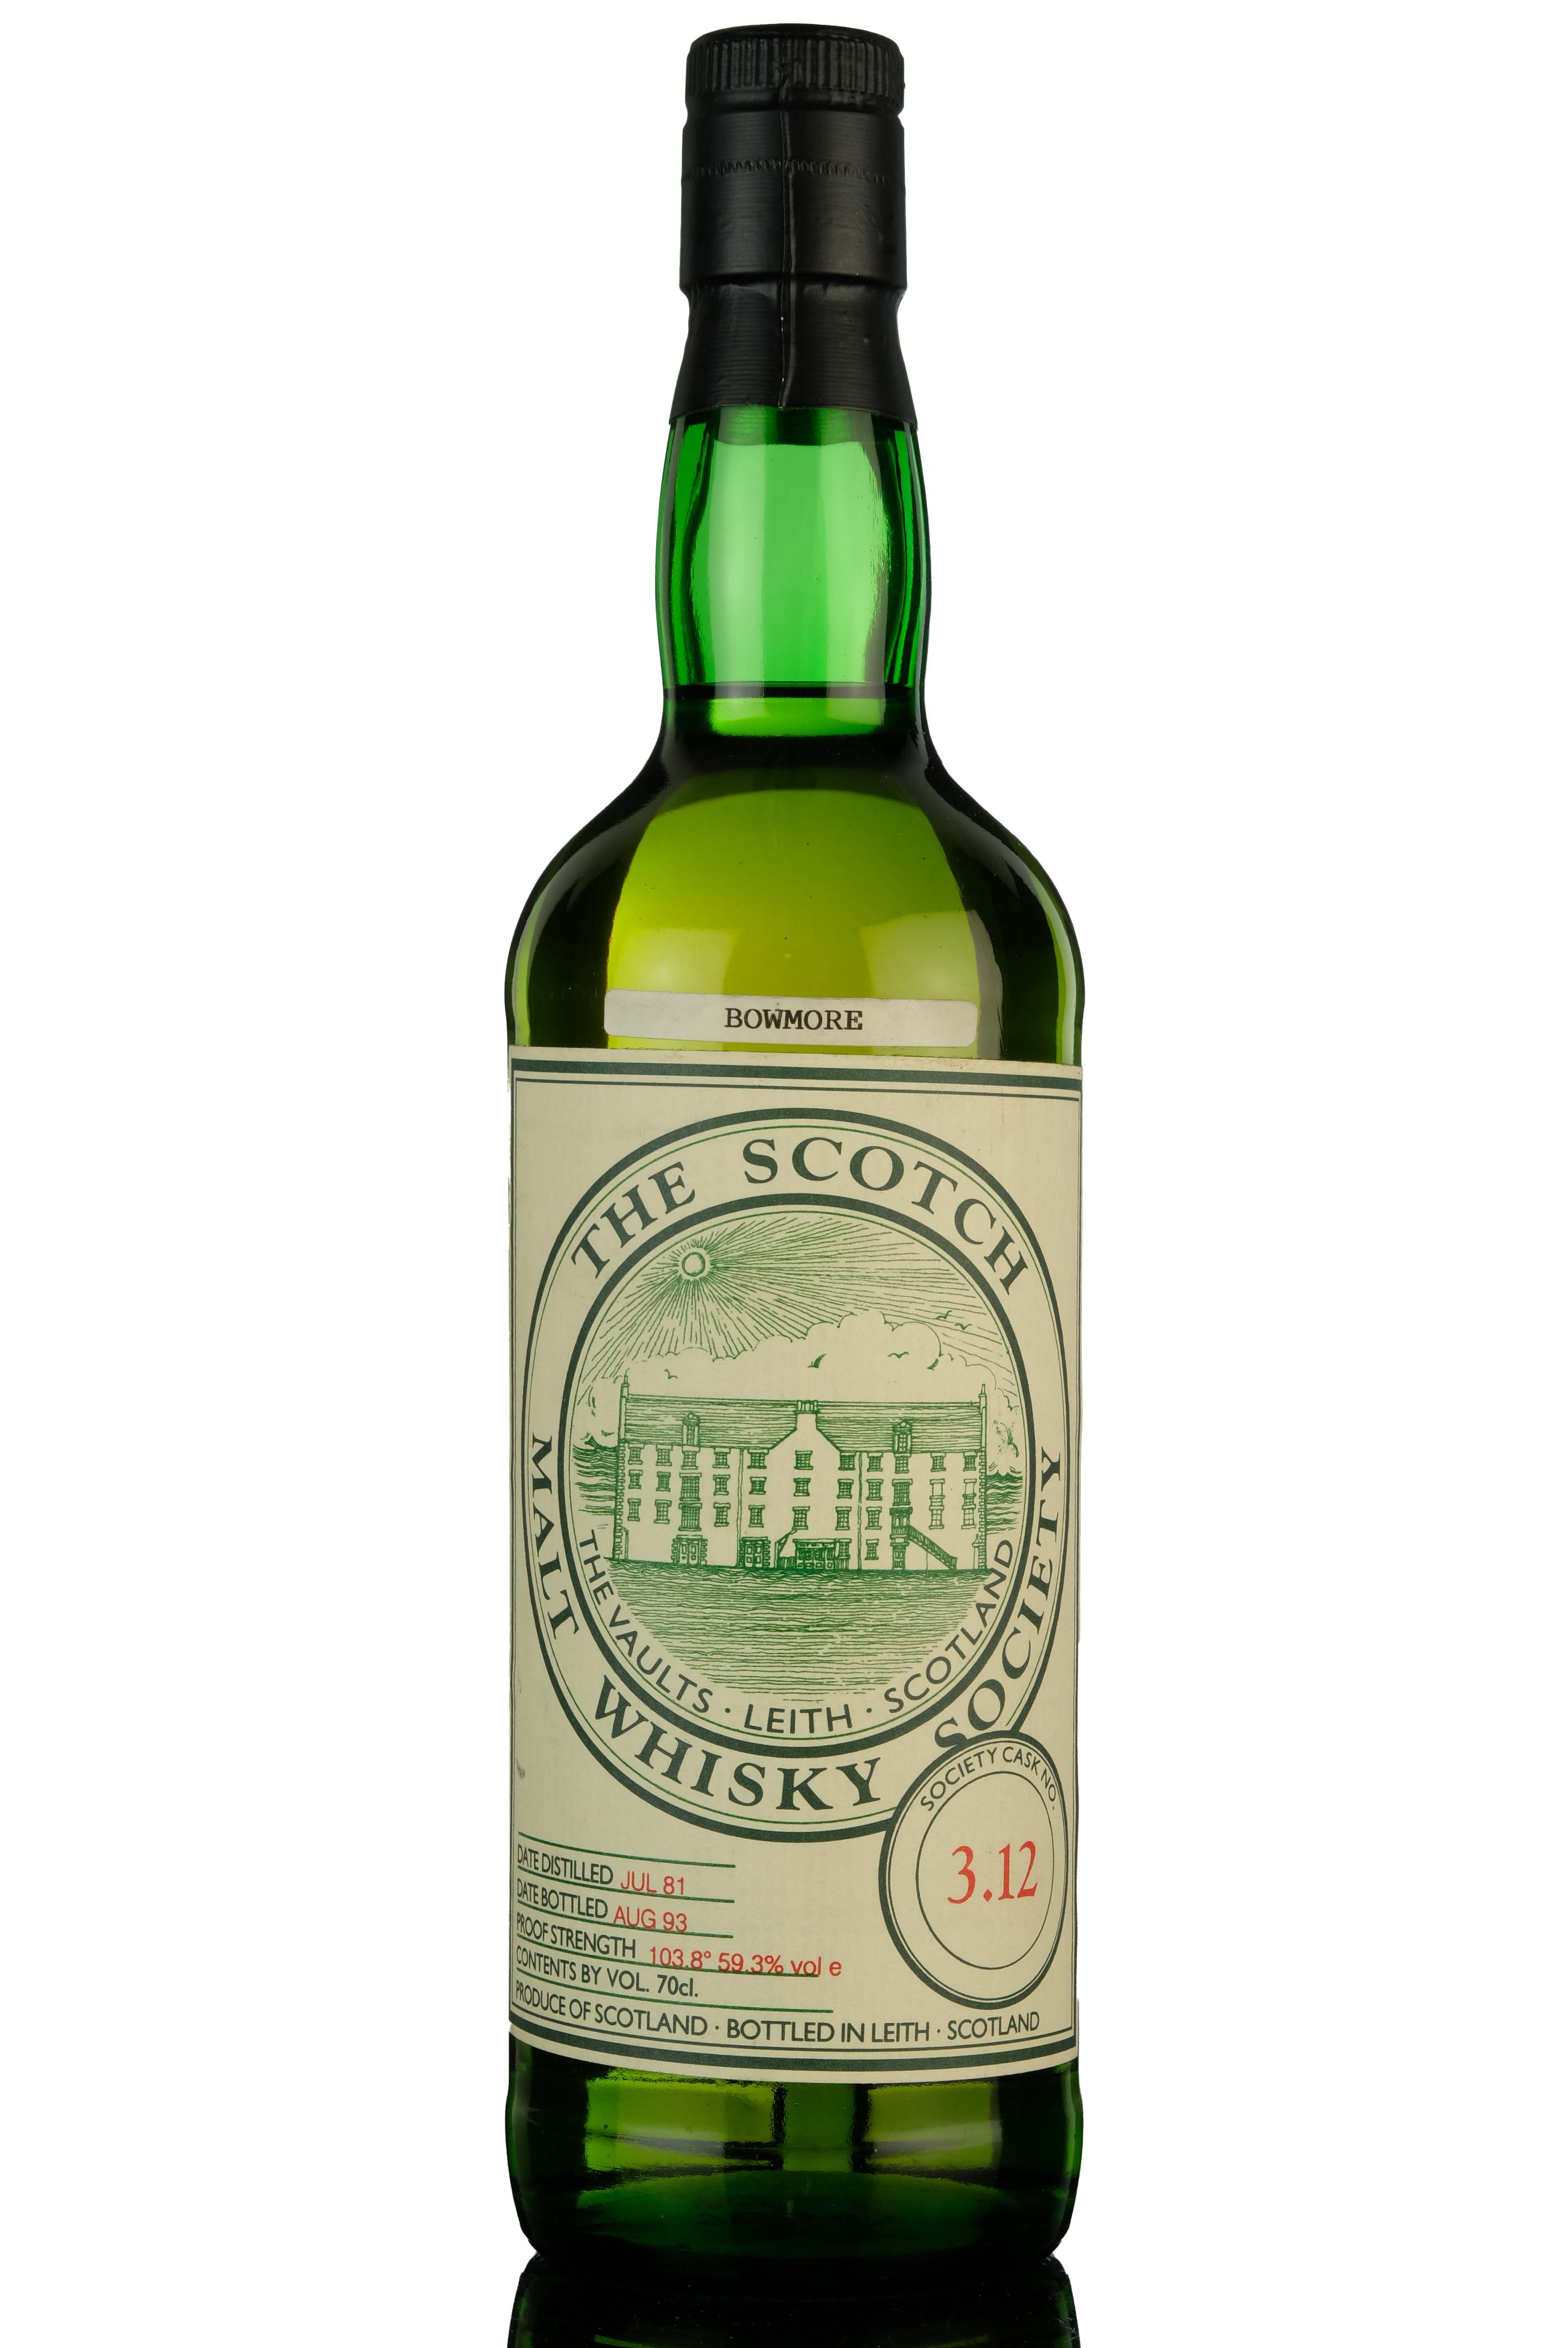 Bowmore 1981-1993 - 12 Year Old - SMWS 3.12 - A Truly Great Aperitif